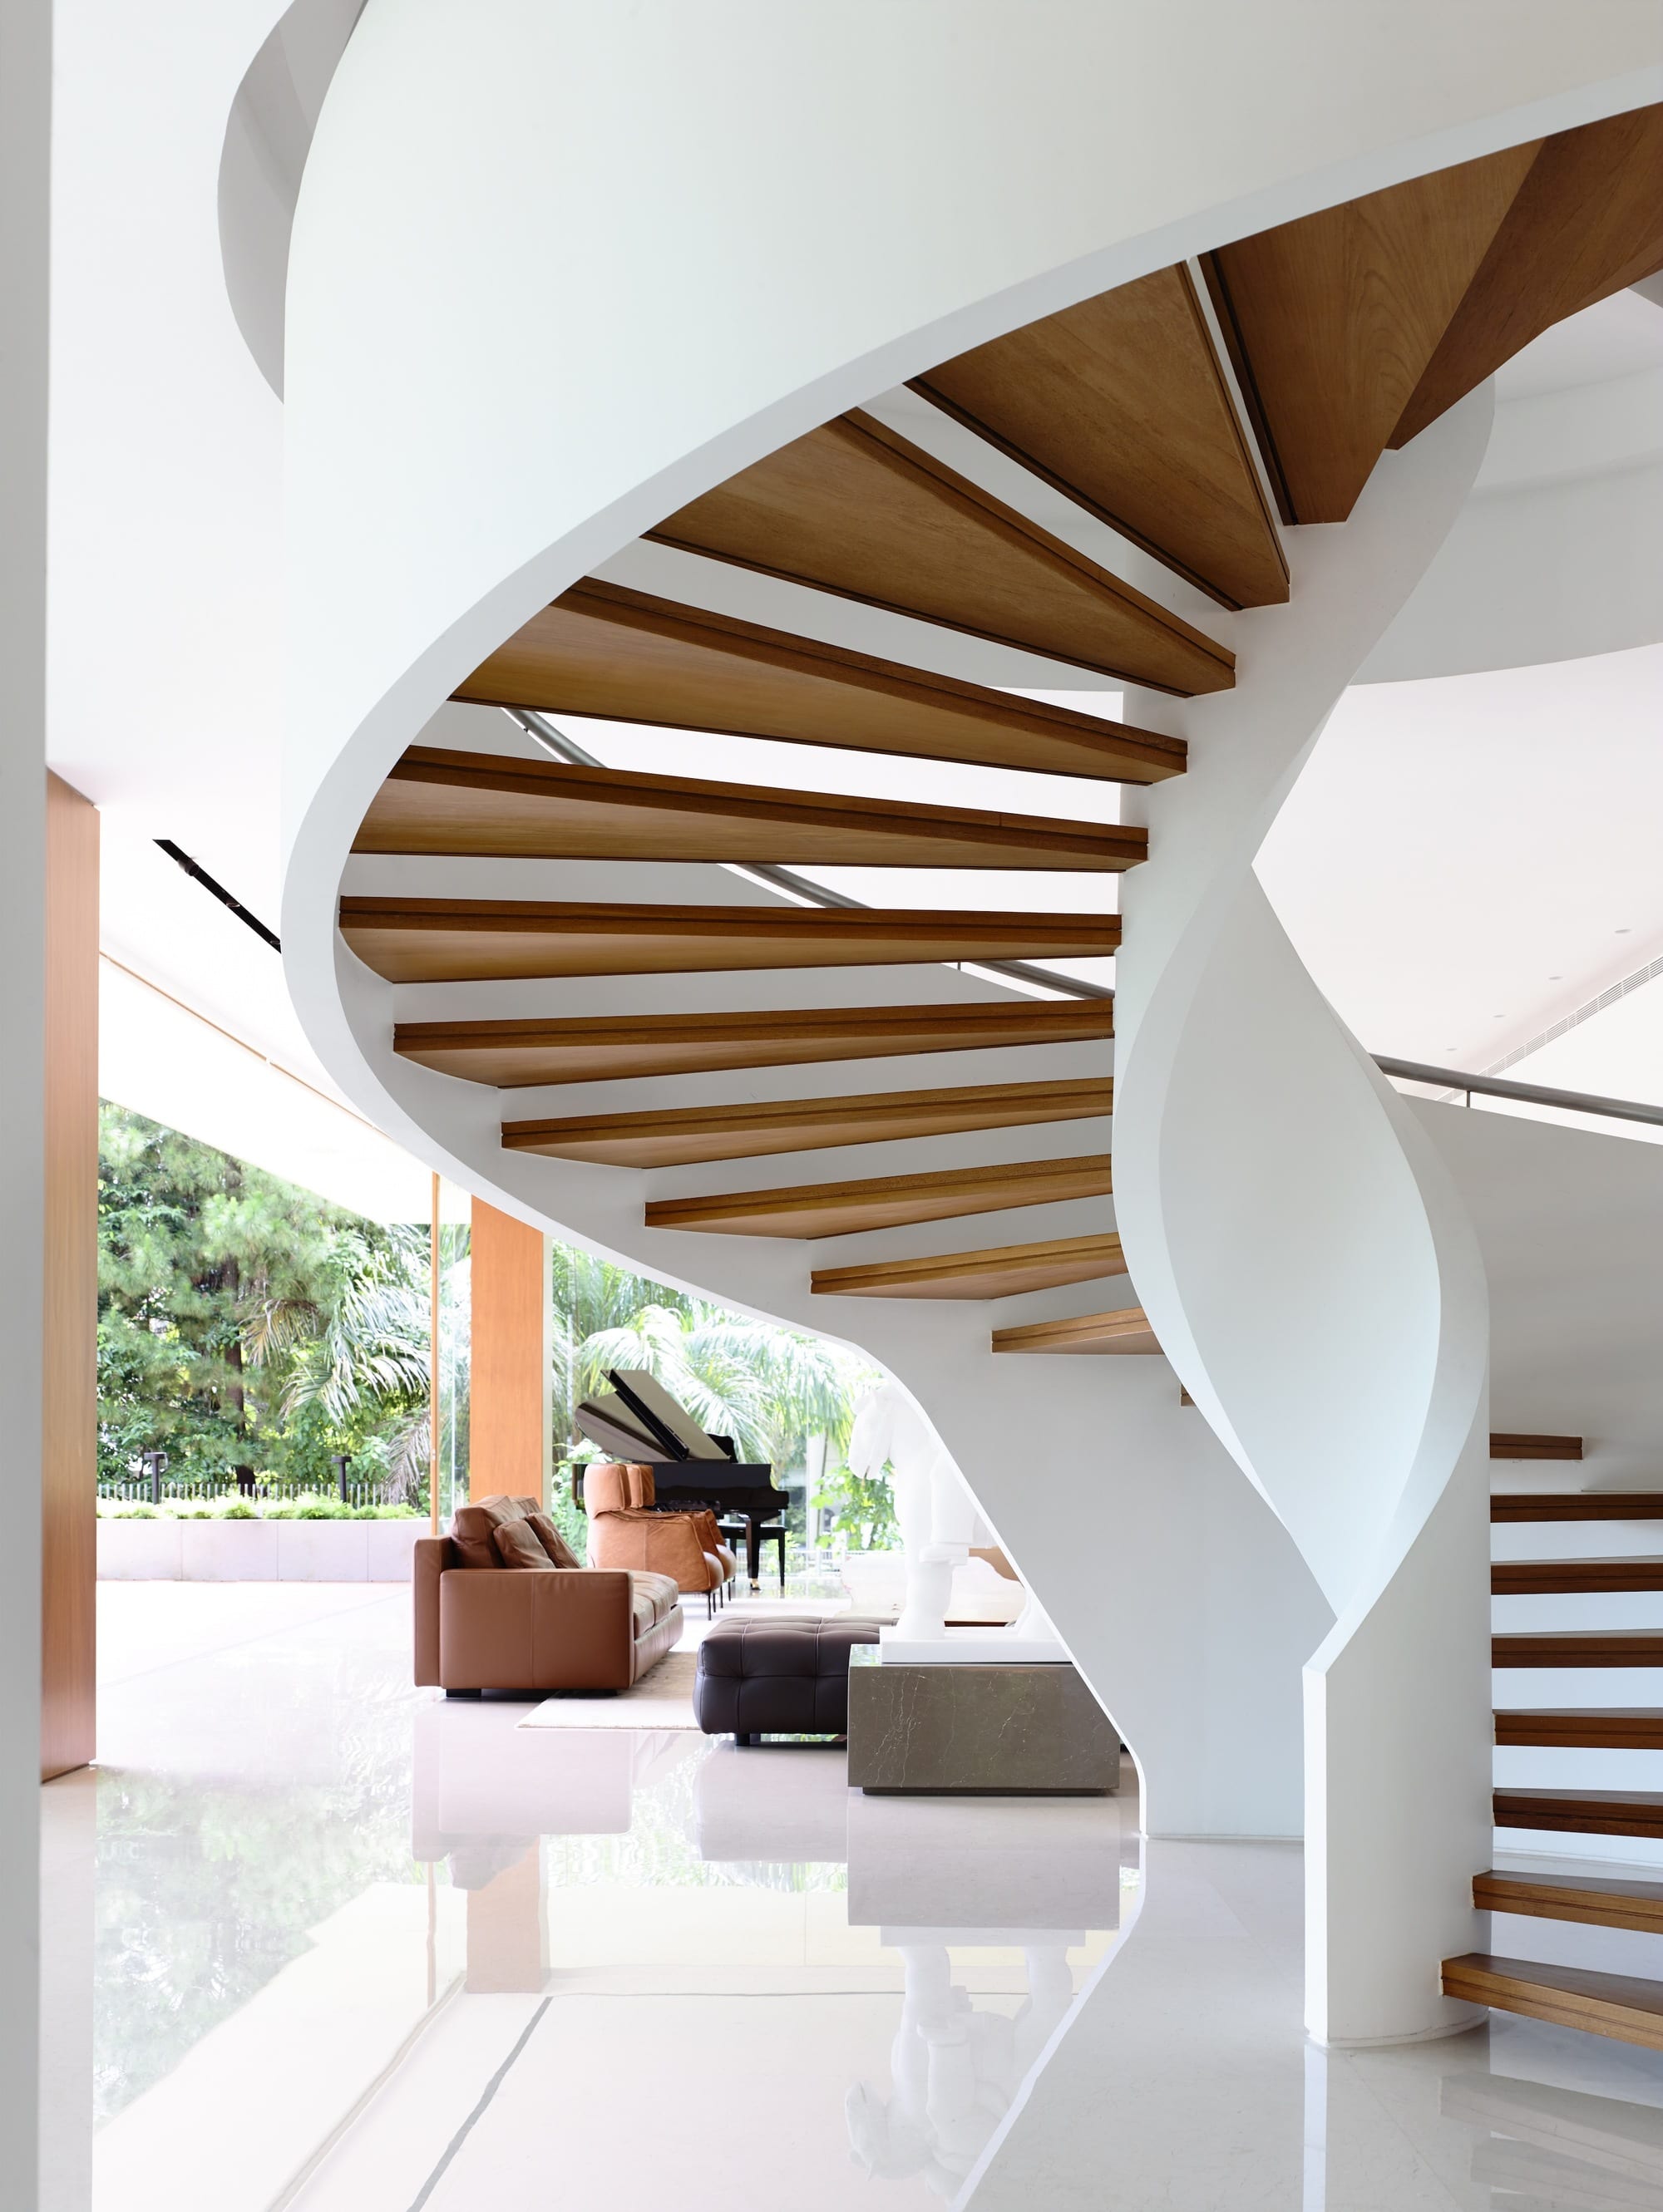 Statement Staircases: Spirals And Sweeps In Luxury Architecture